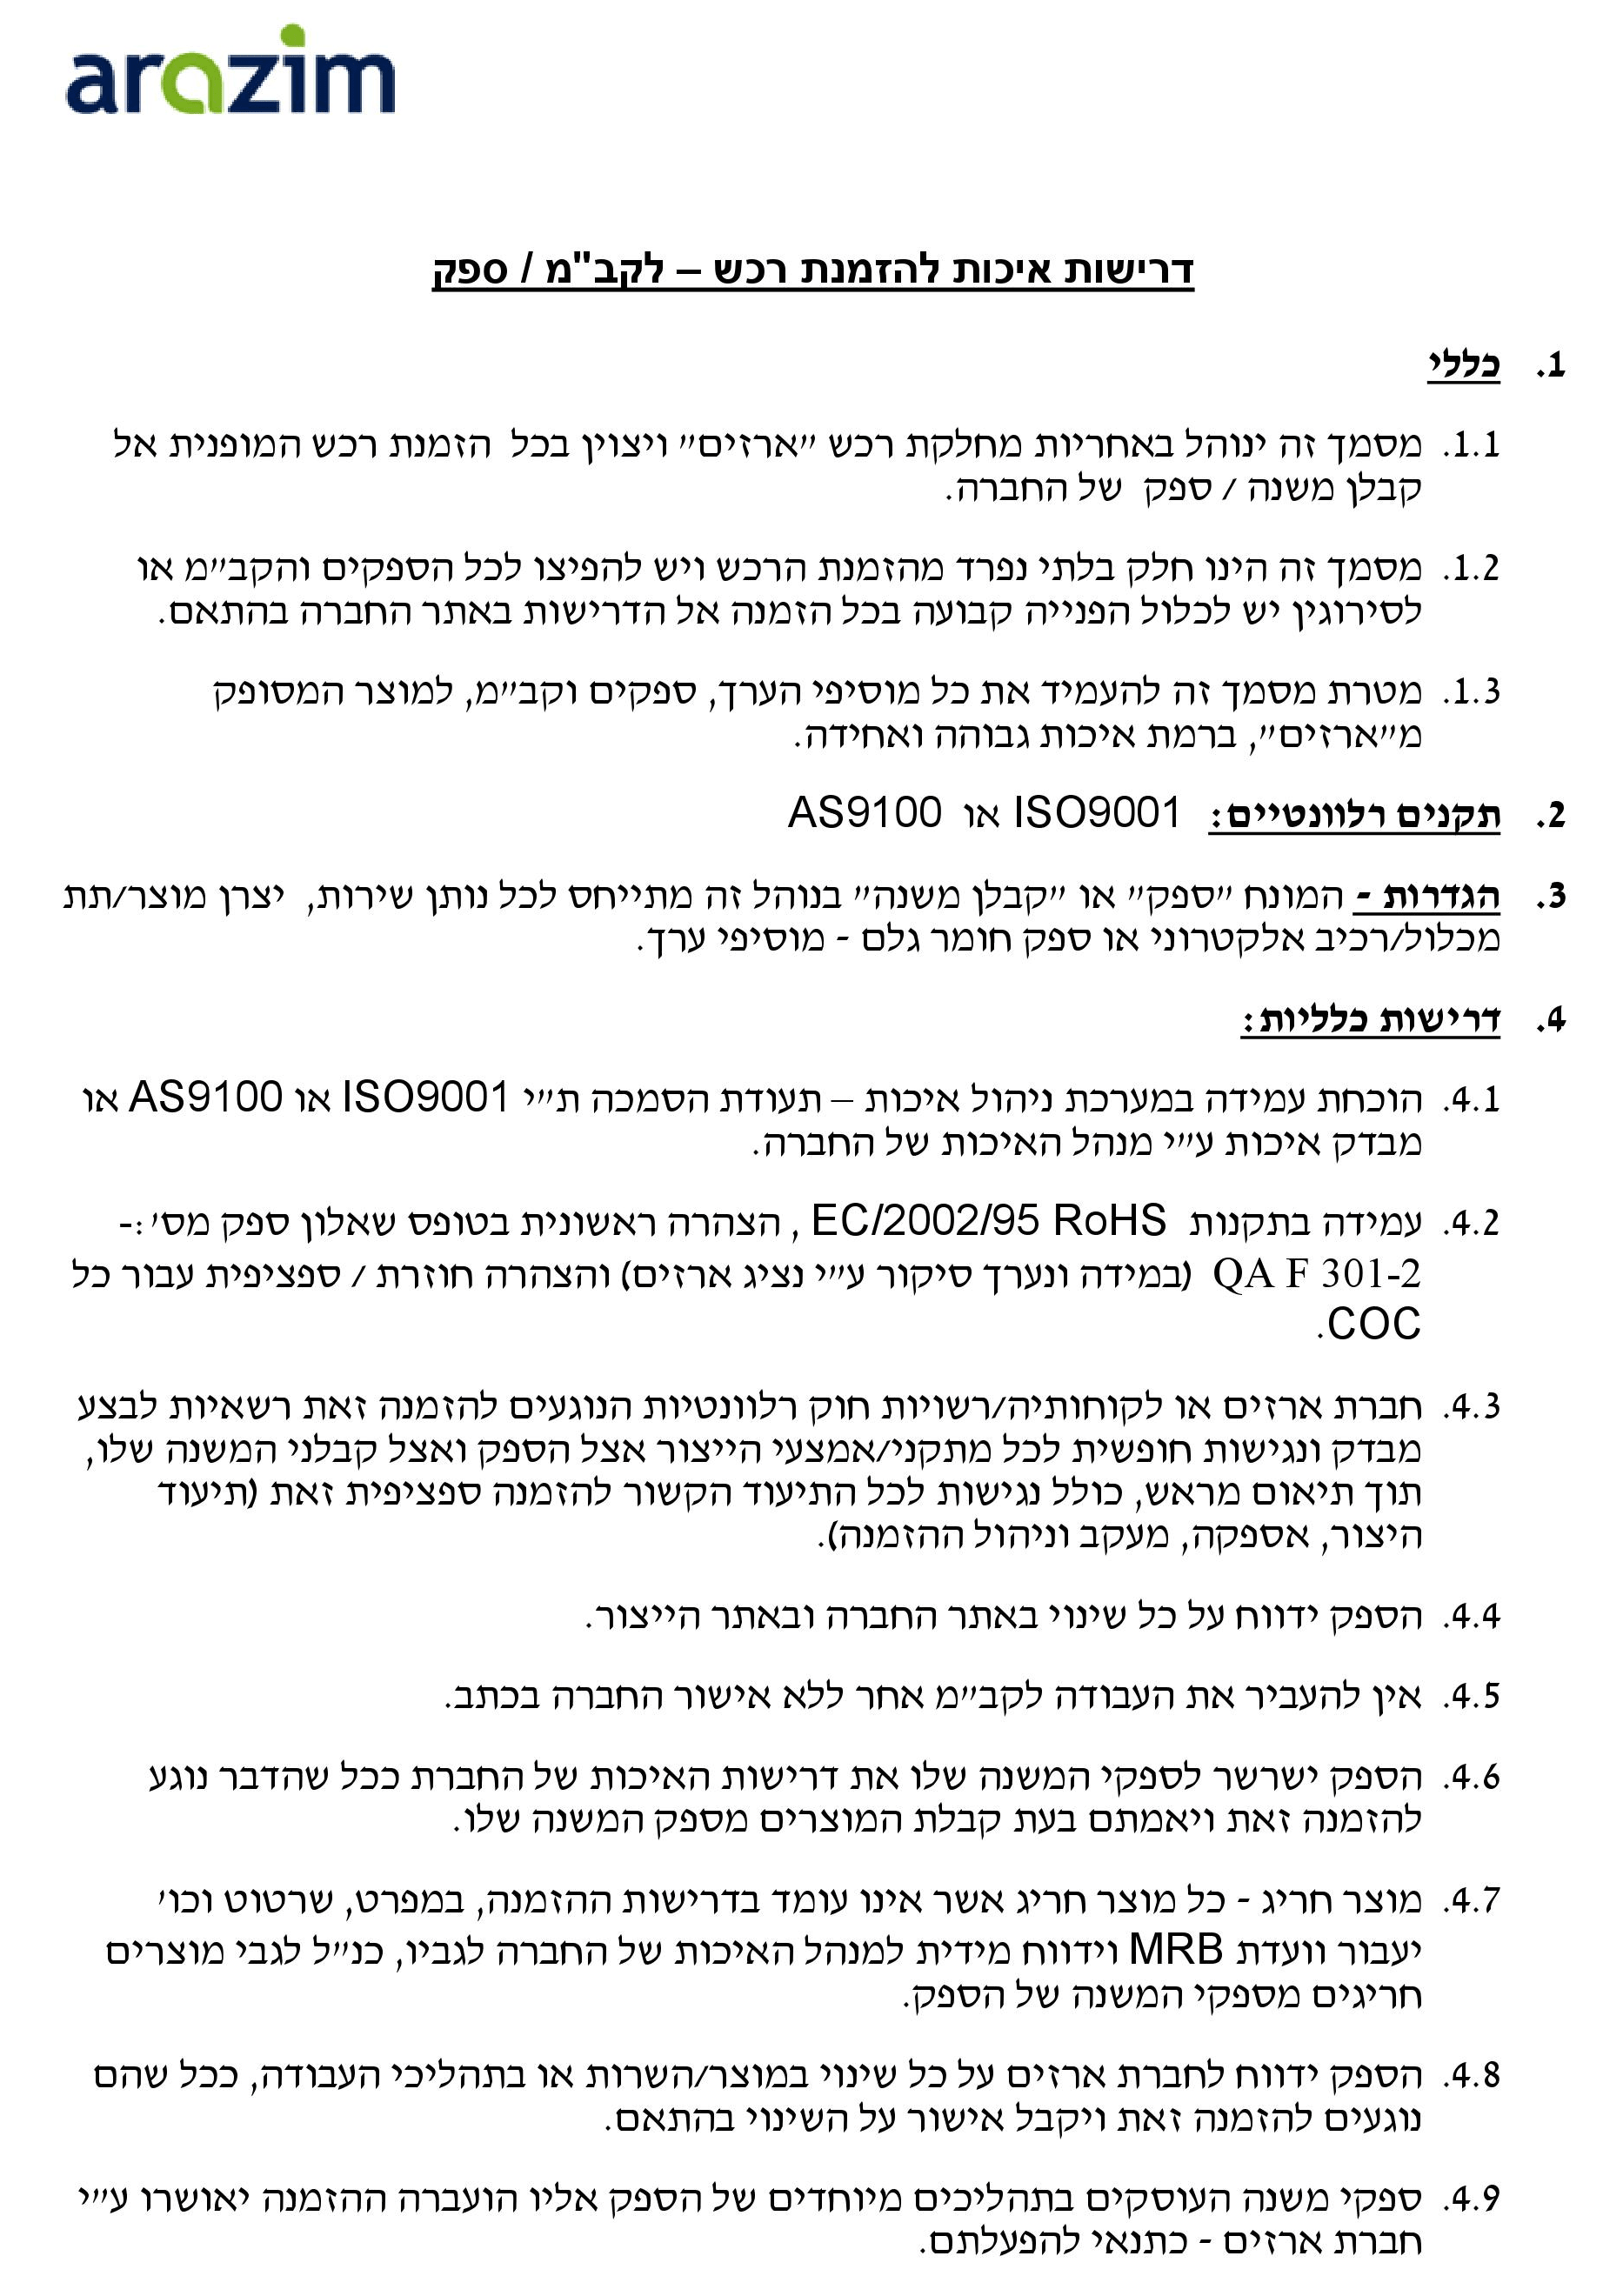 Guidelines For Purchase Orders (Hebrew)